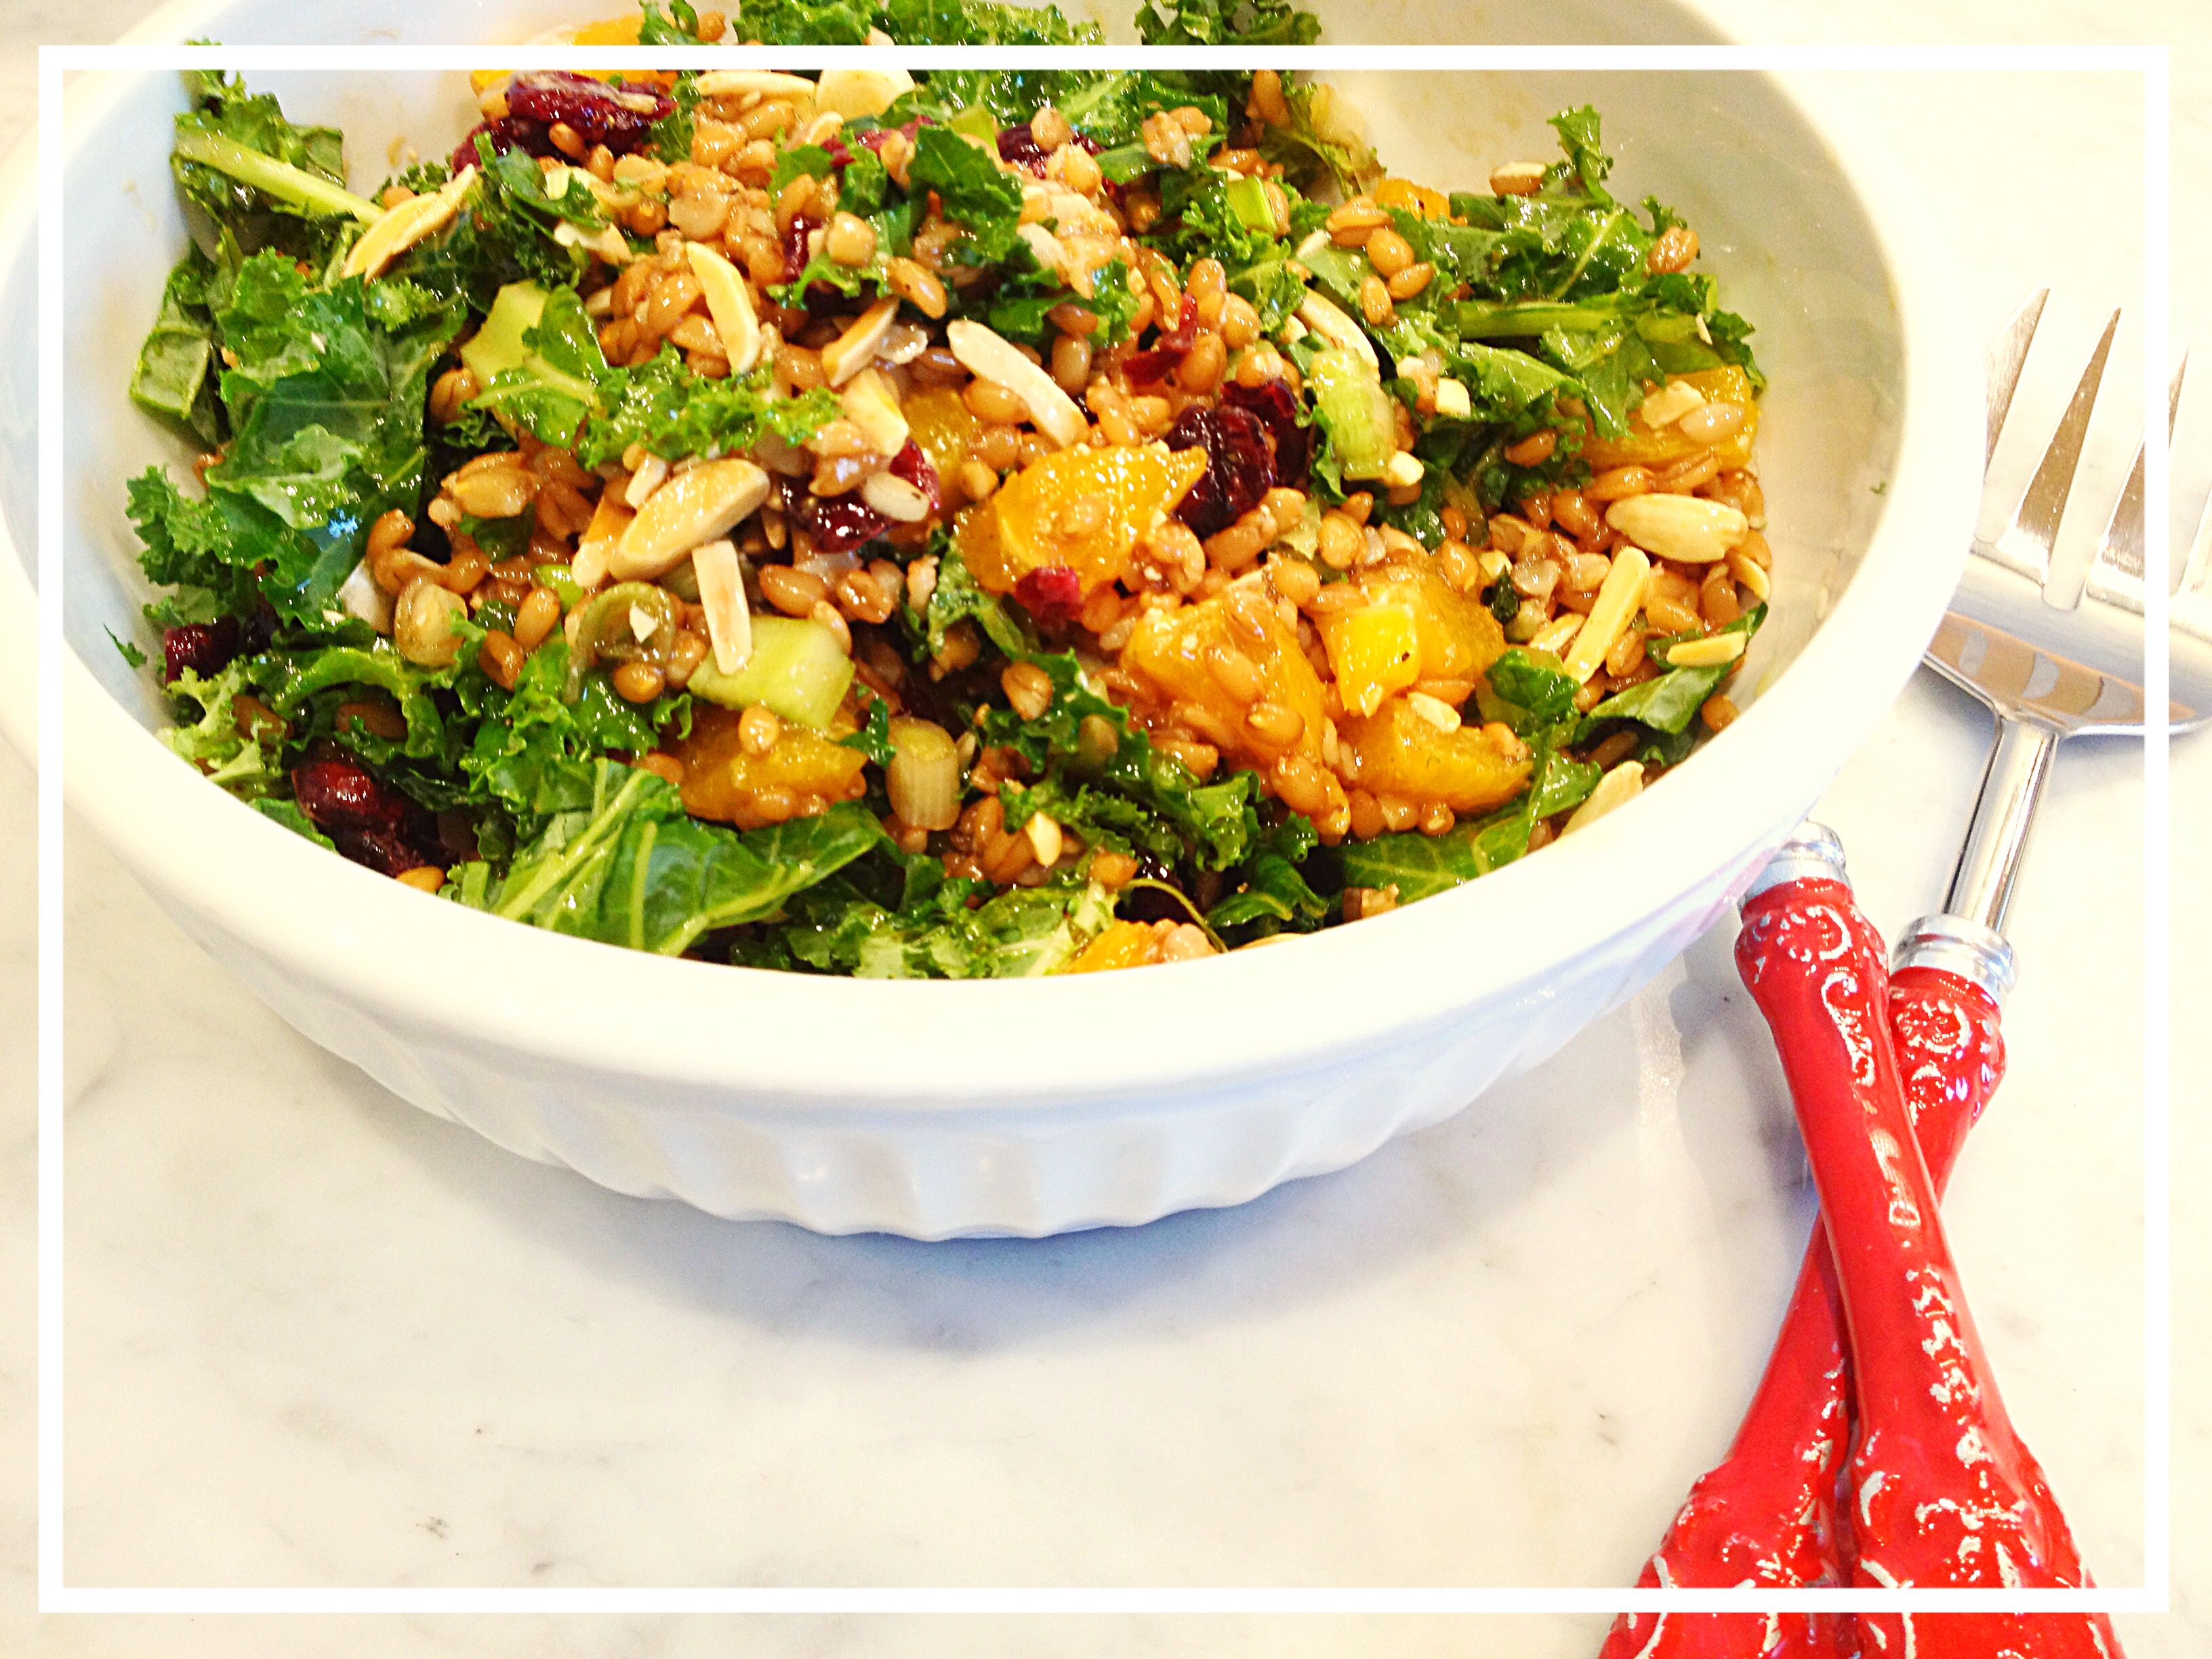 wheat berry salad dotted with almonds, crtanberries, oranges, and kale